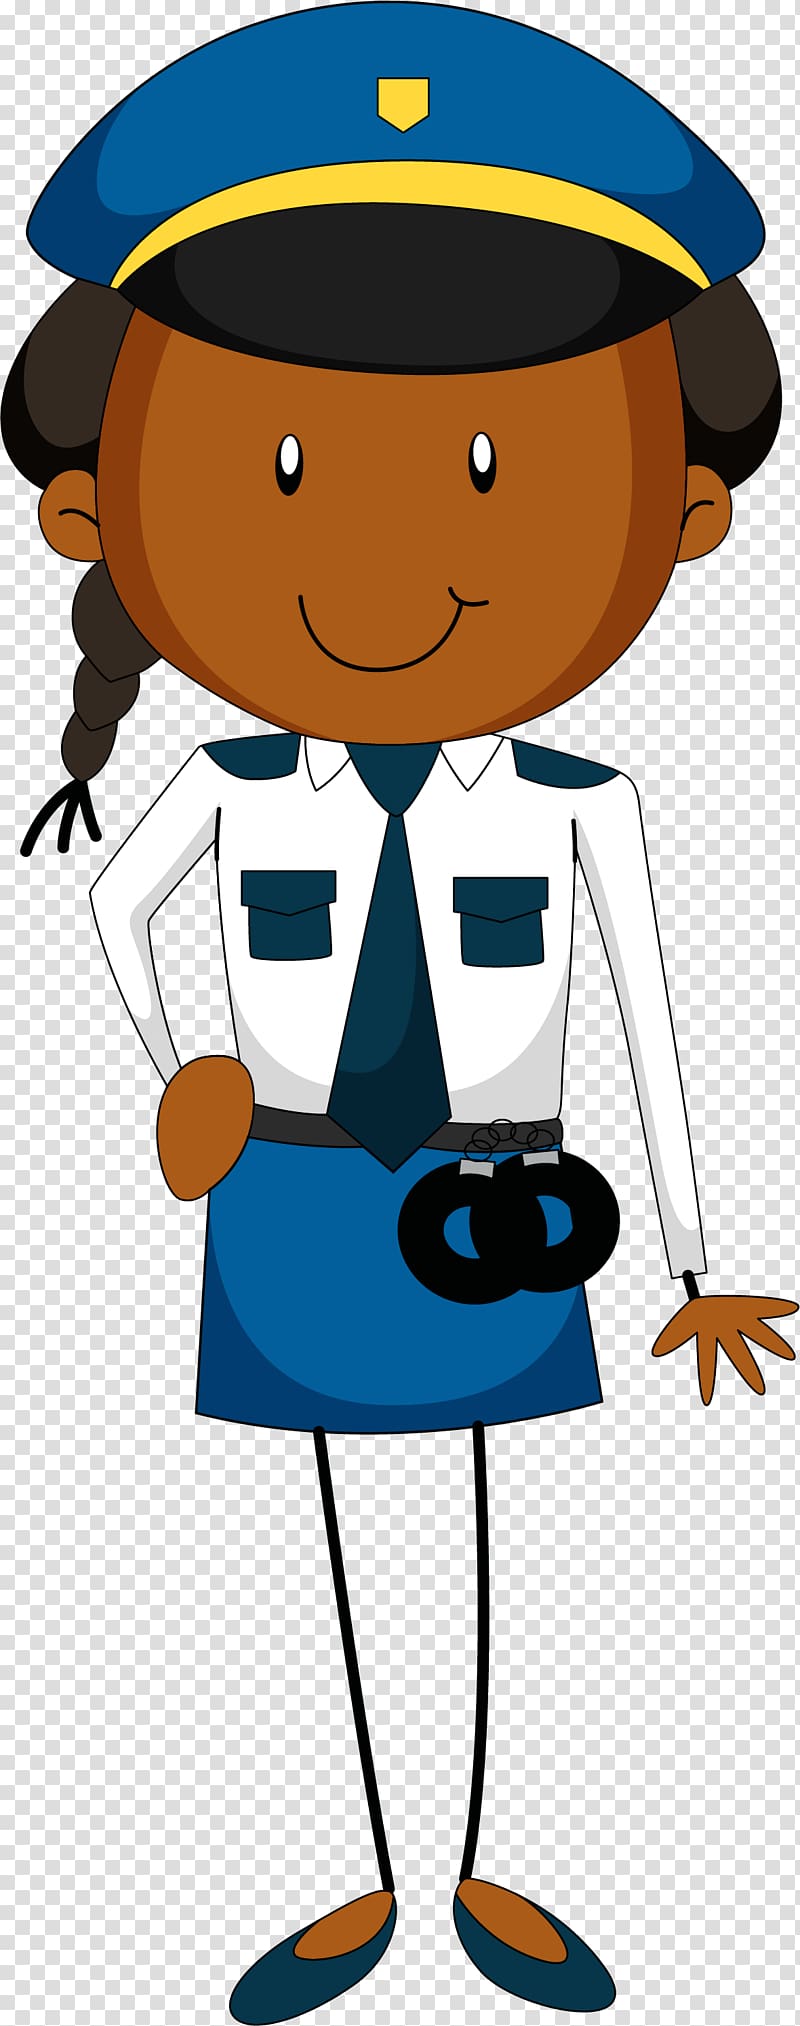 Police officer , Cartoon policewoman transparent background PNG clipart